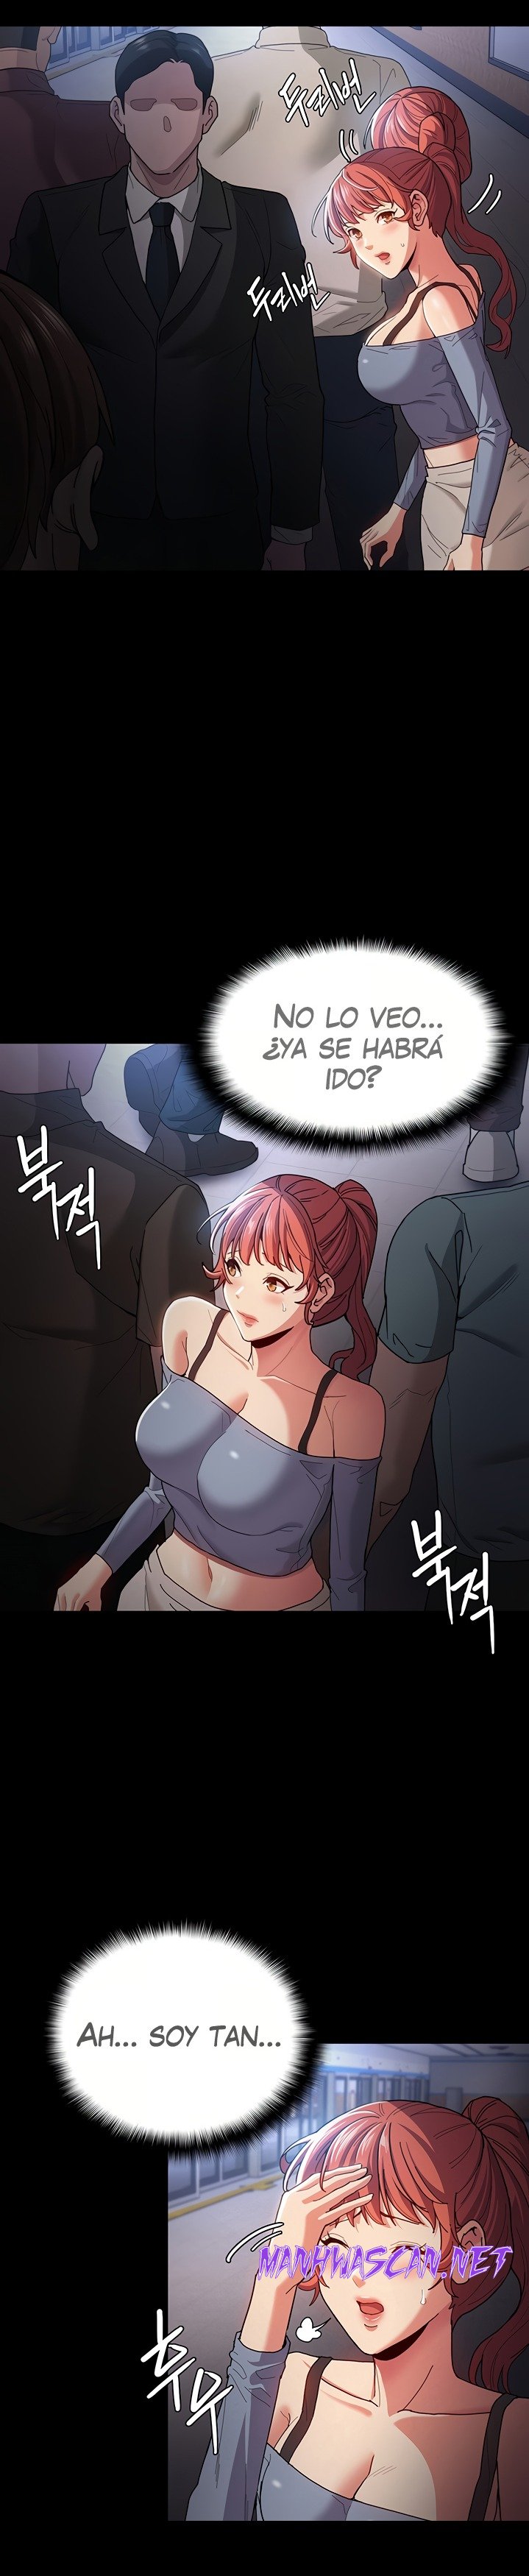 Pervert Diary Raw - Chapter 6 Page 6